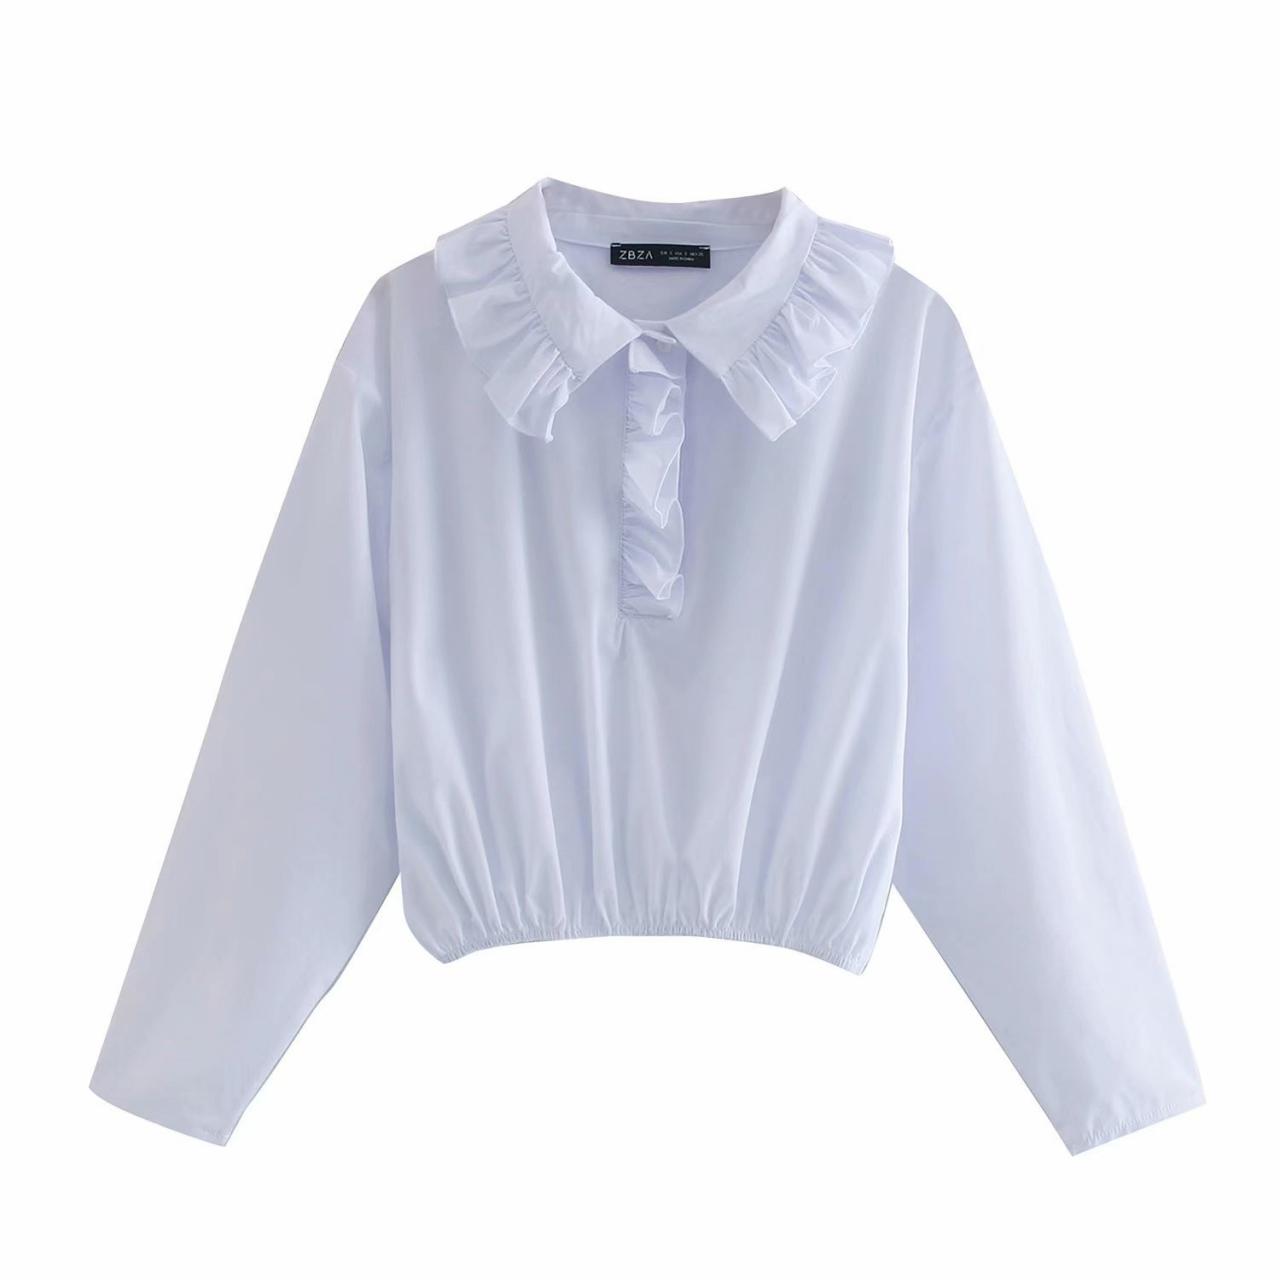 Autumn Women's Wear Is Versatile, Slim And Stylish, Stacked And Decorated Shirt